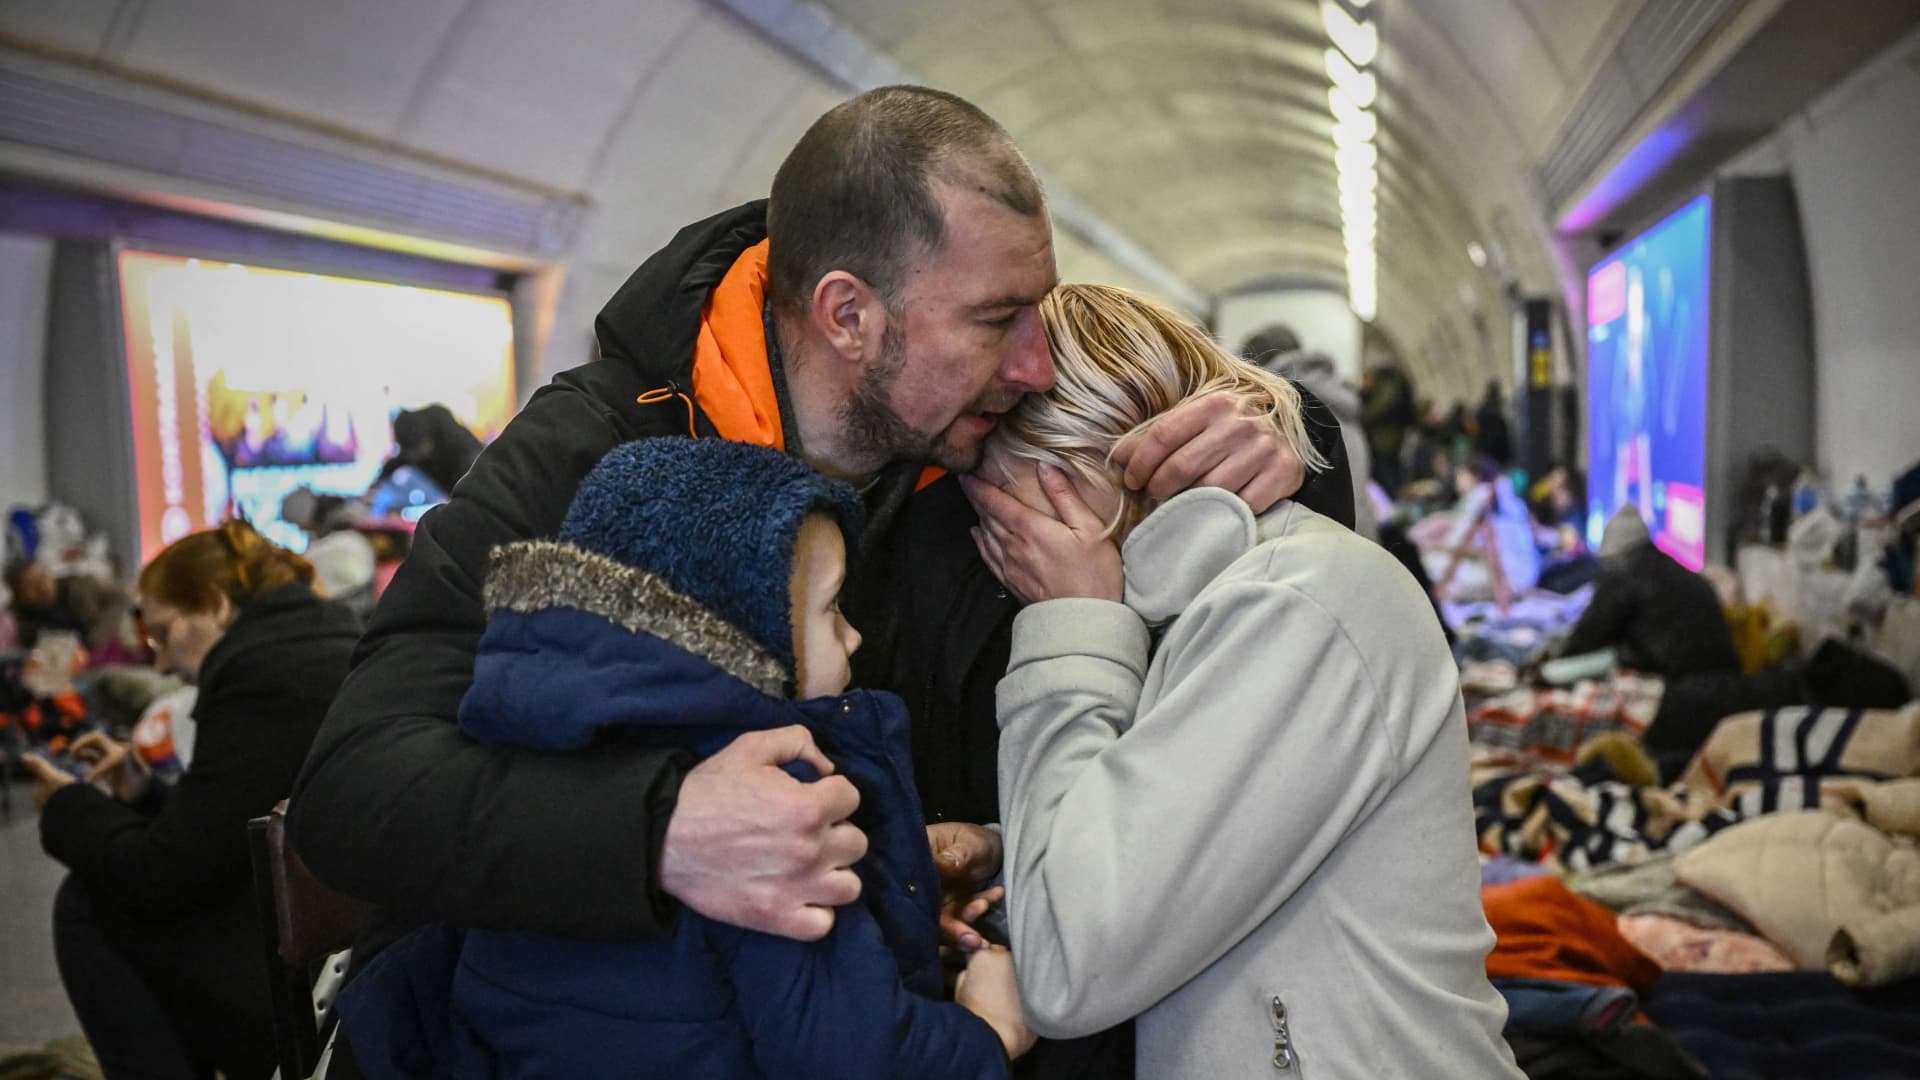 Sergyi Badylevych, 41, hugs his wife Natalia Badylevych, 42, and baby in an underground metro station used as bomb shelter in Kyiv on March 2, 2022.